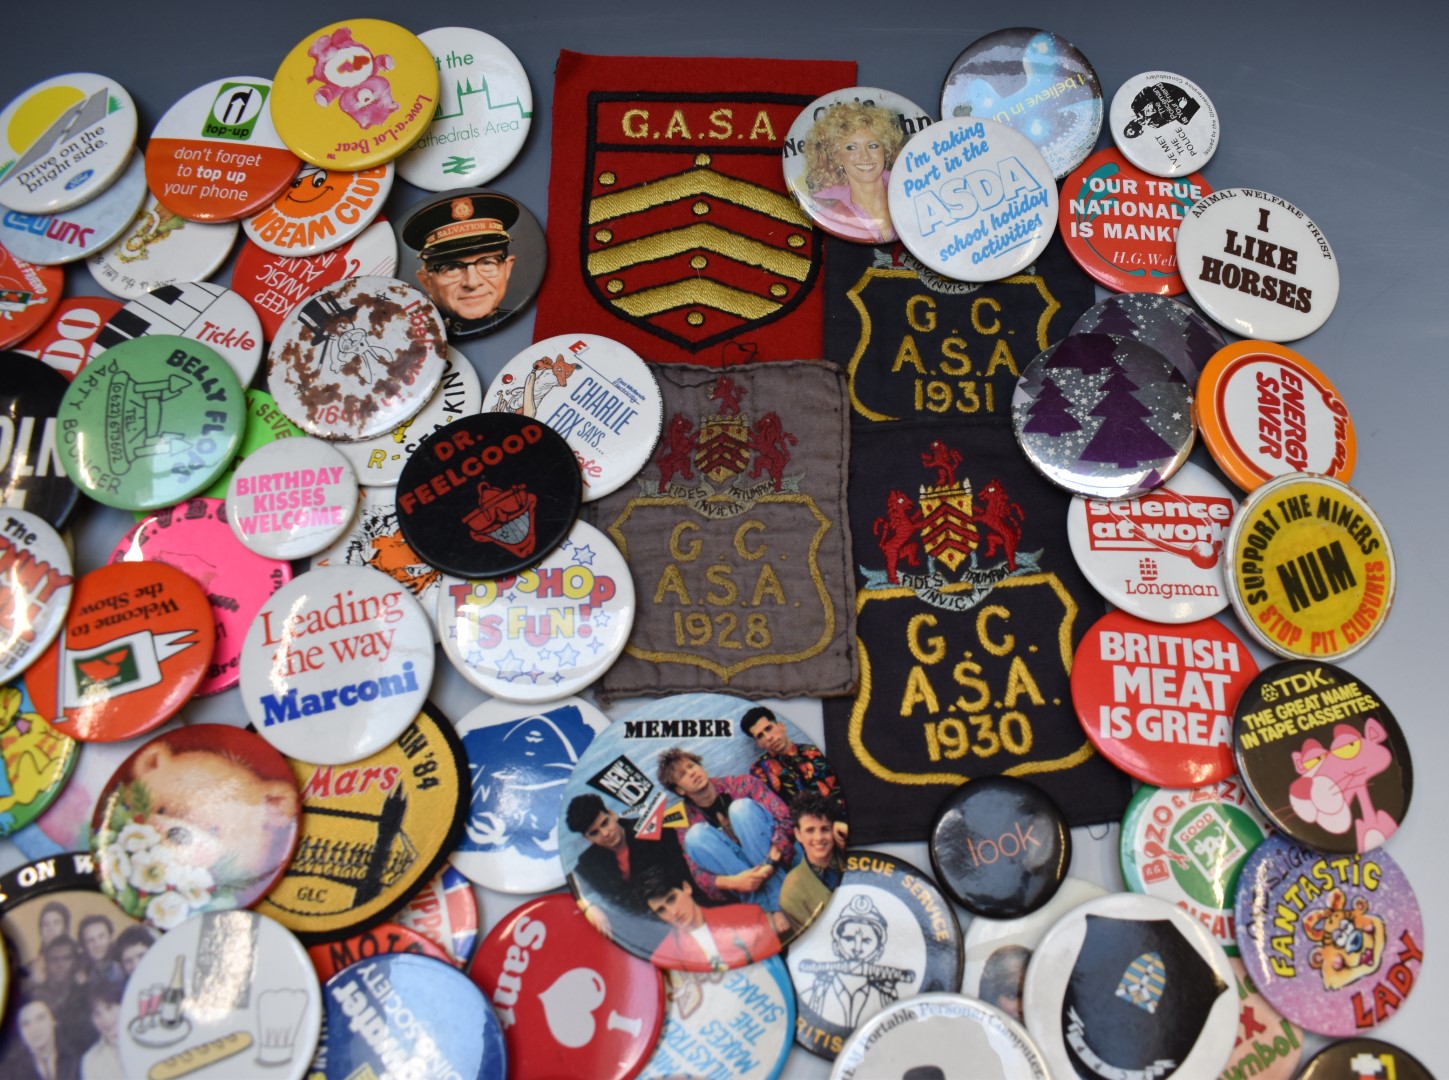 Over 1000 vintage and collectable badges including social history, advertising, humorous, slogans, - Image 3 of 9